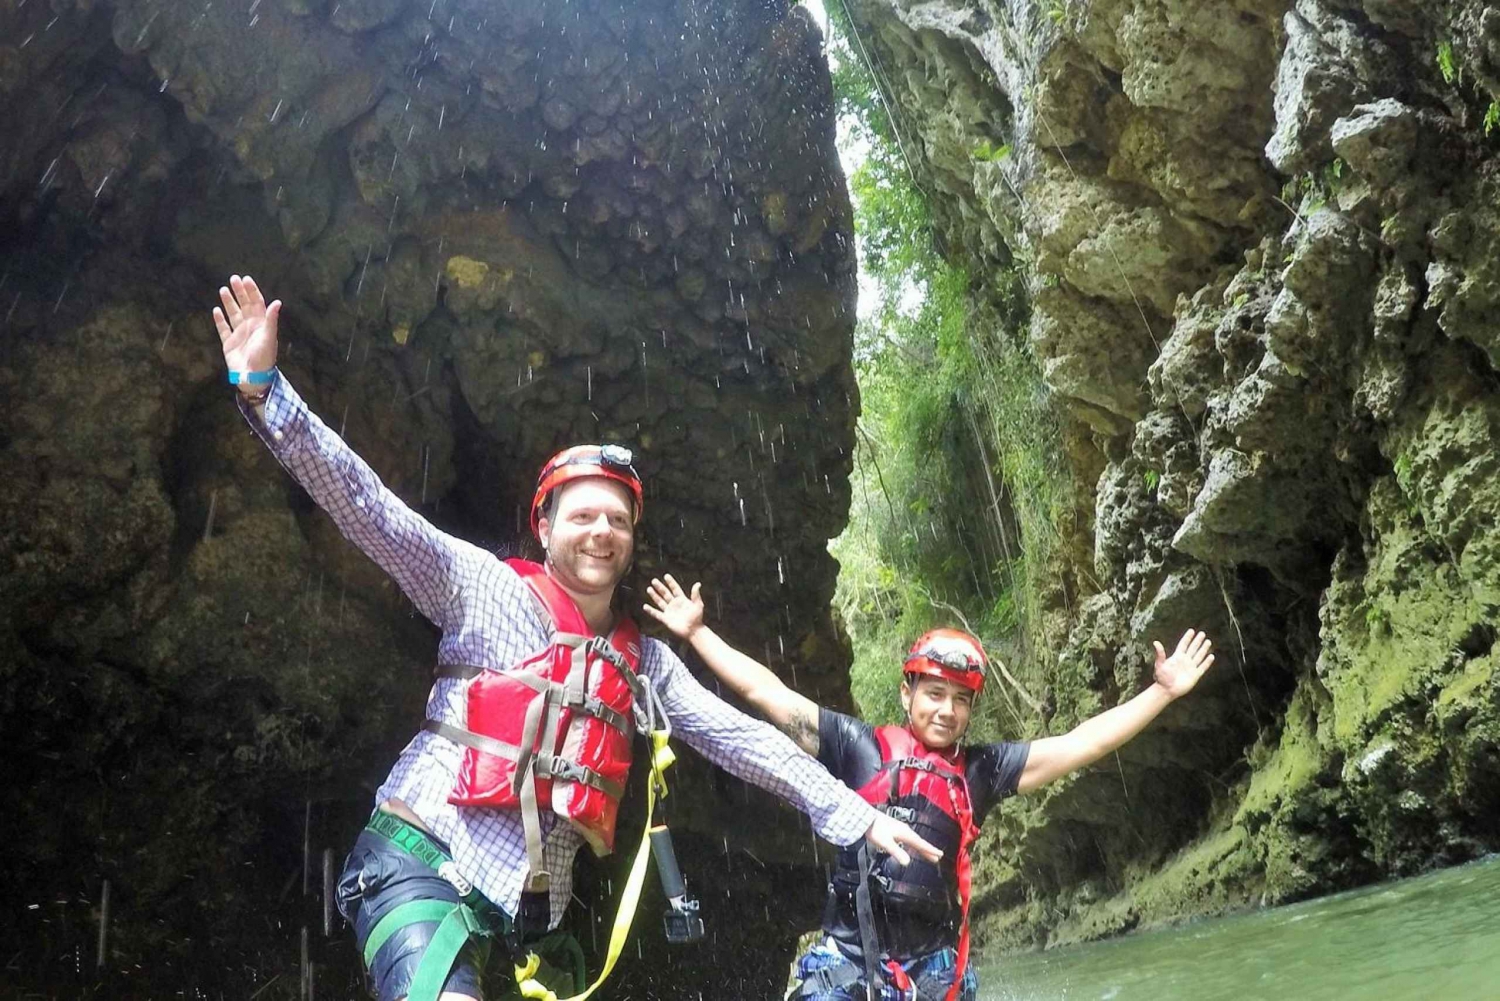 Body Rafting, Caving: off the beaten, path Nature reserve.